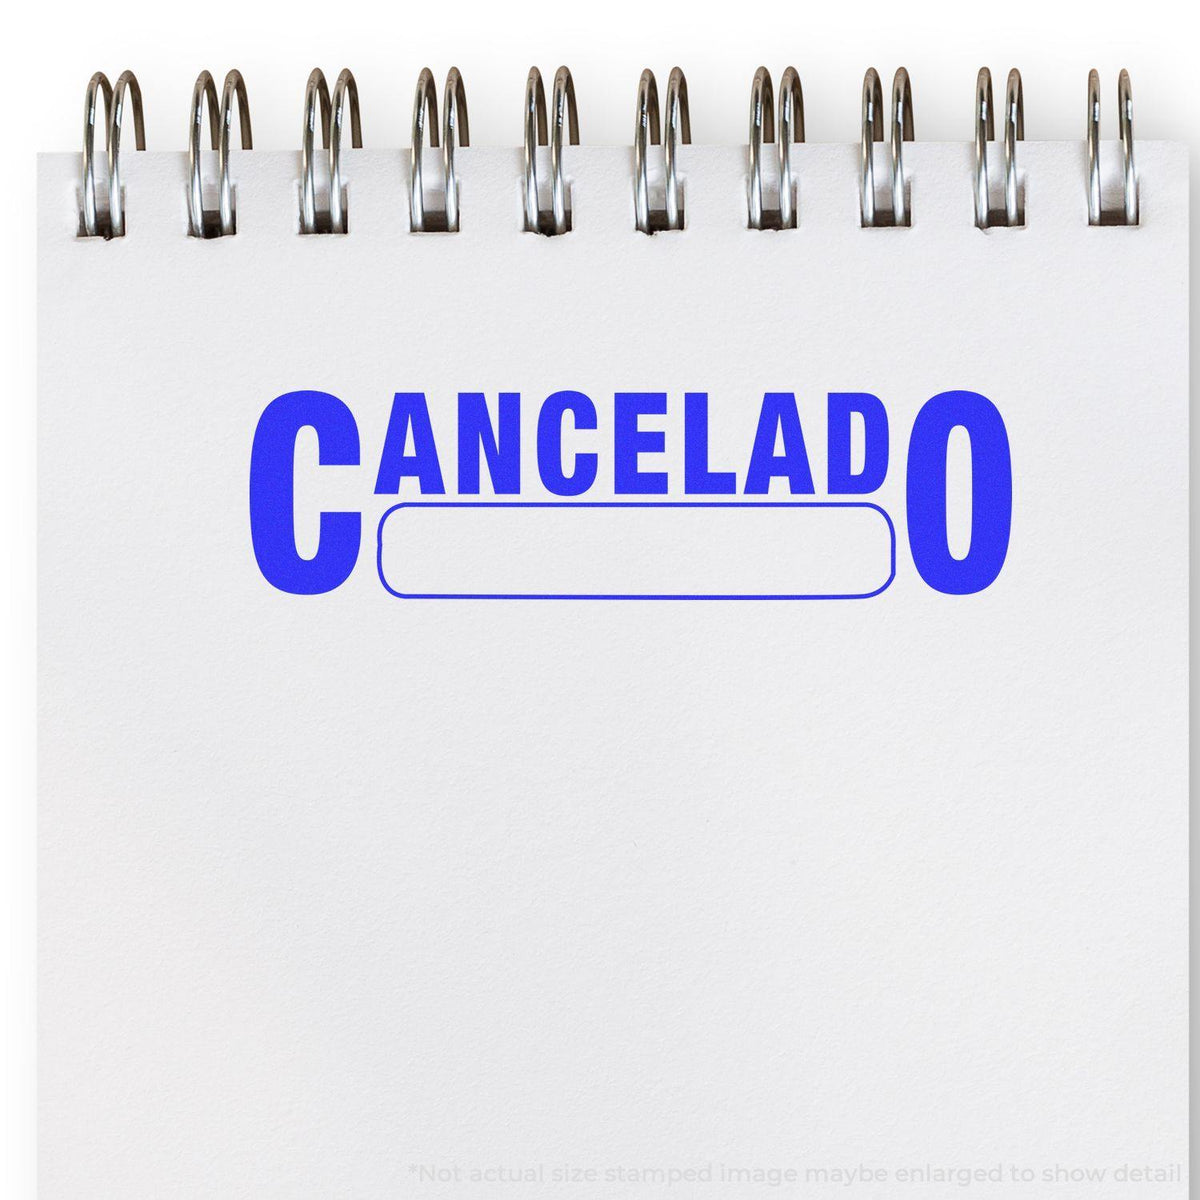 In Use Cancelado with Box Rubber Stamp Image